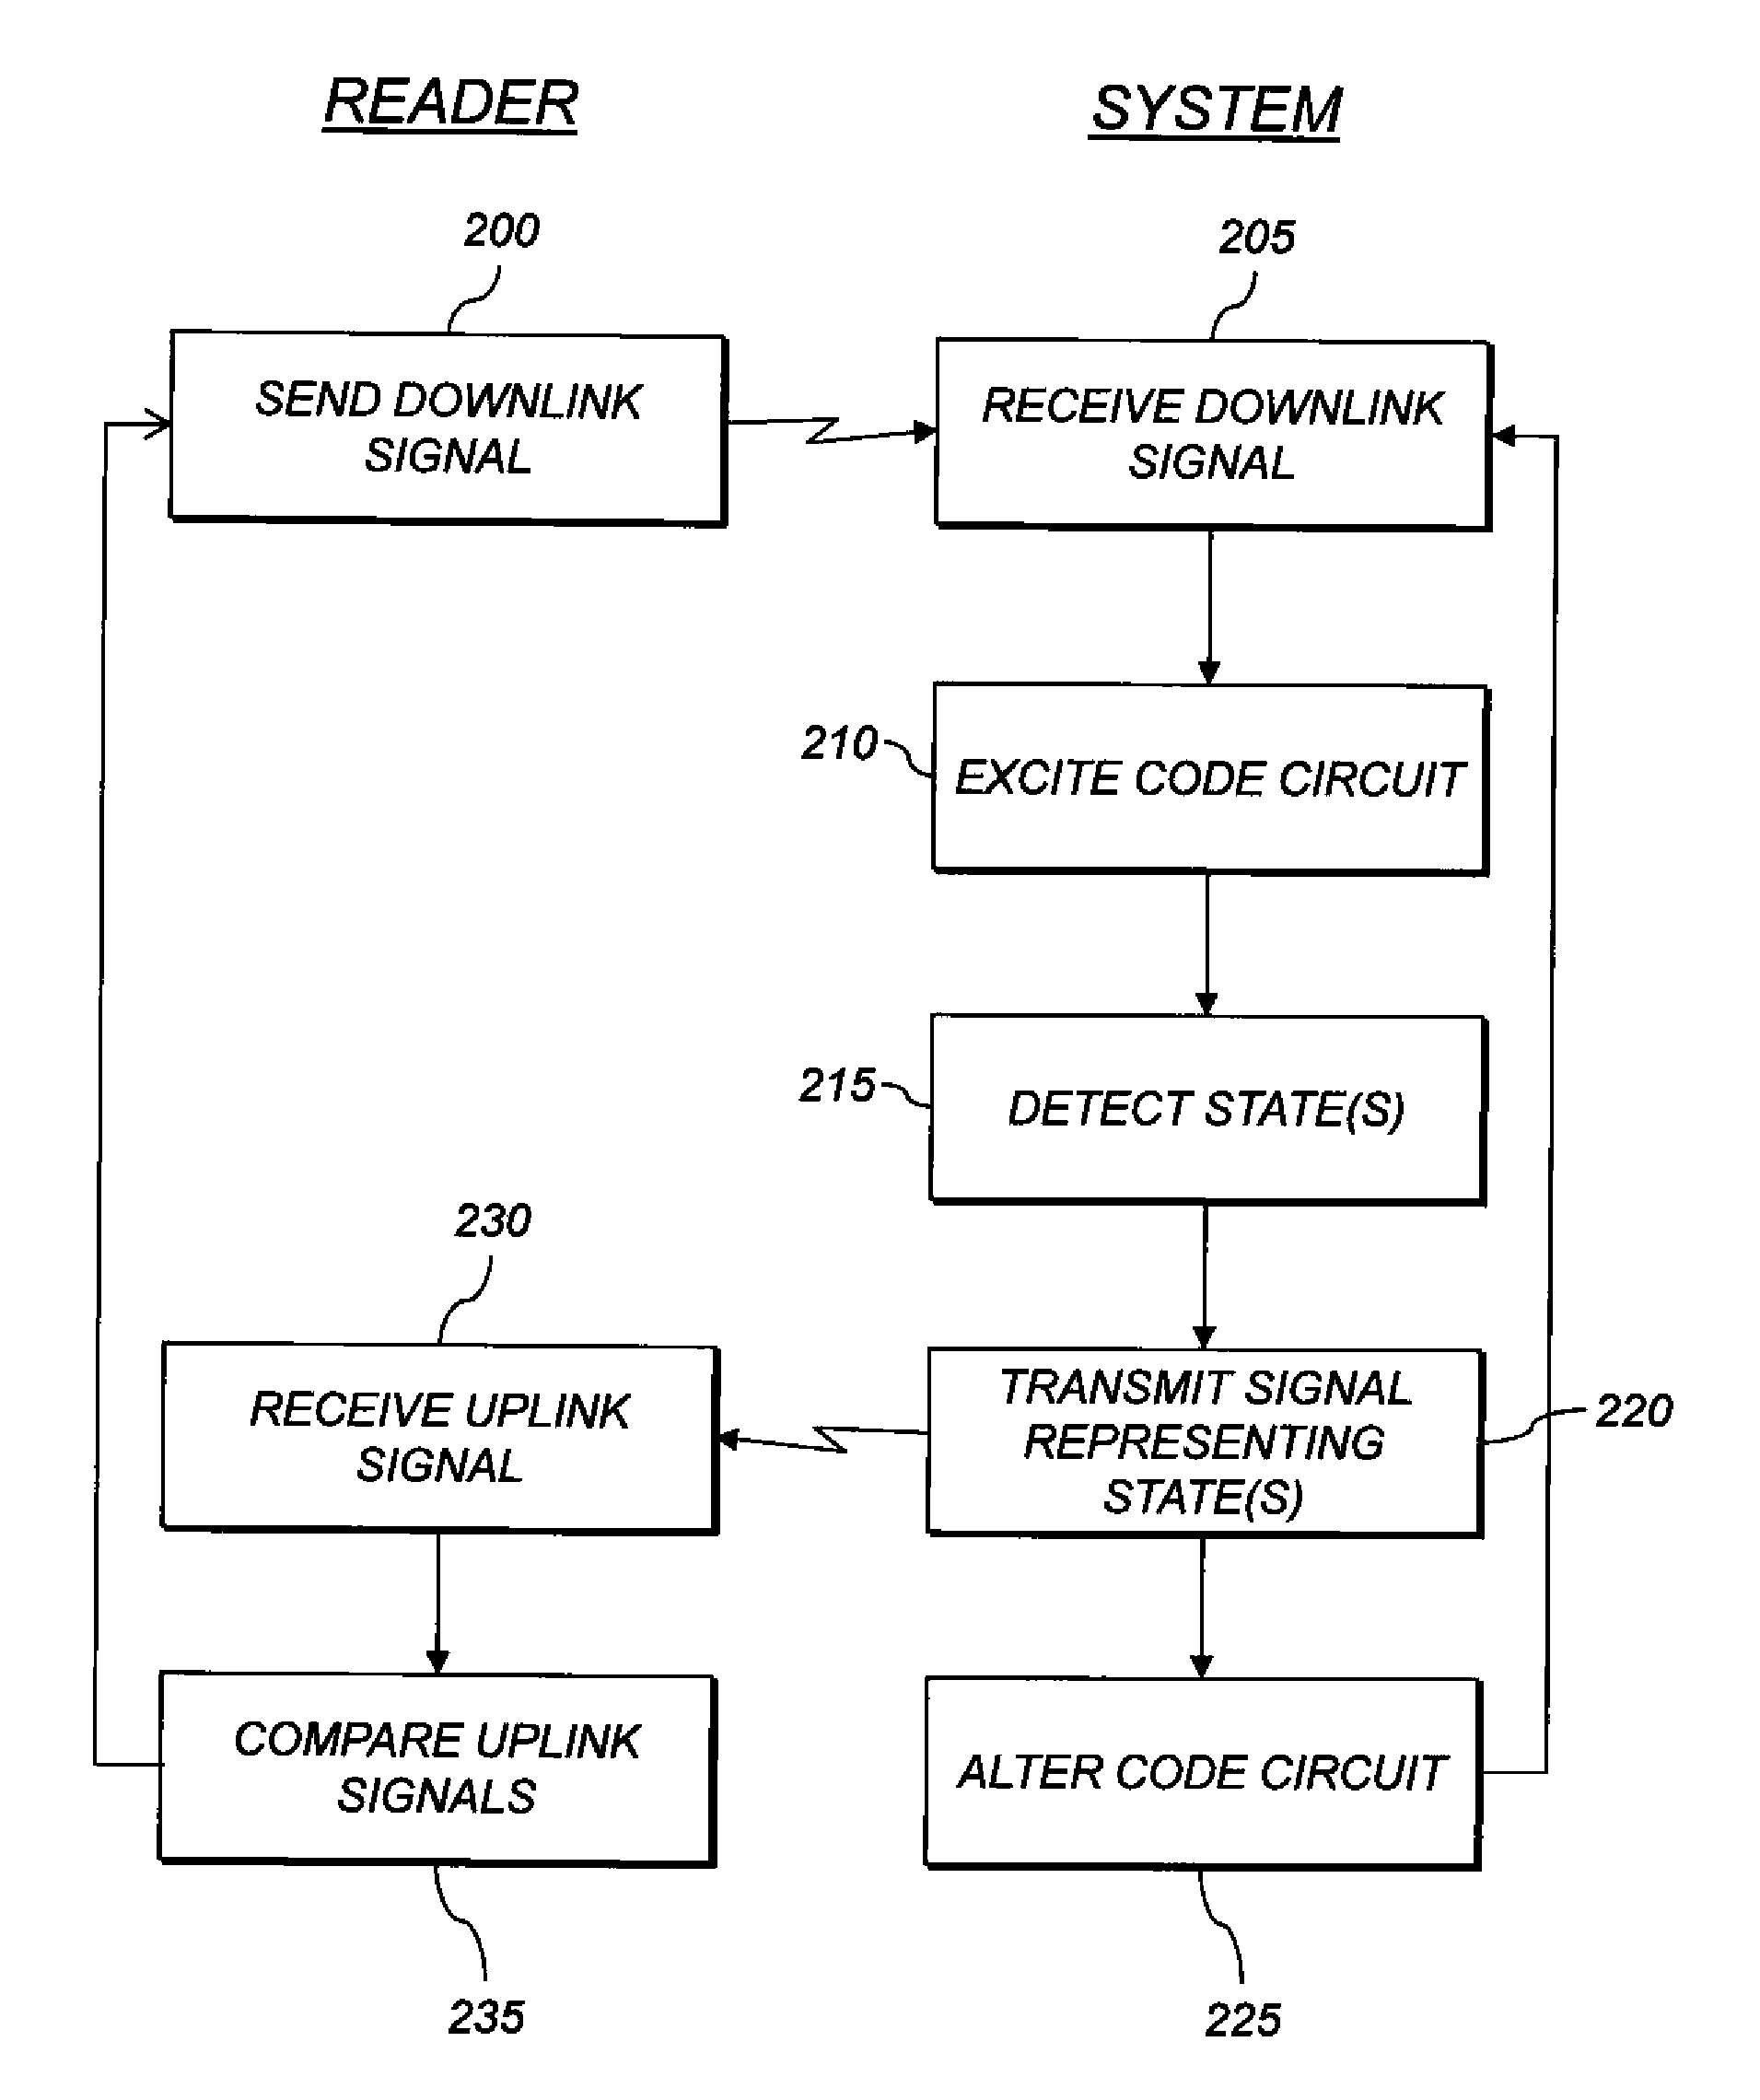 Making storage system having modifiable conductor and memory